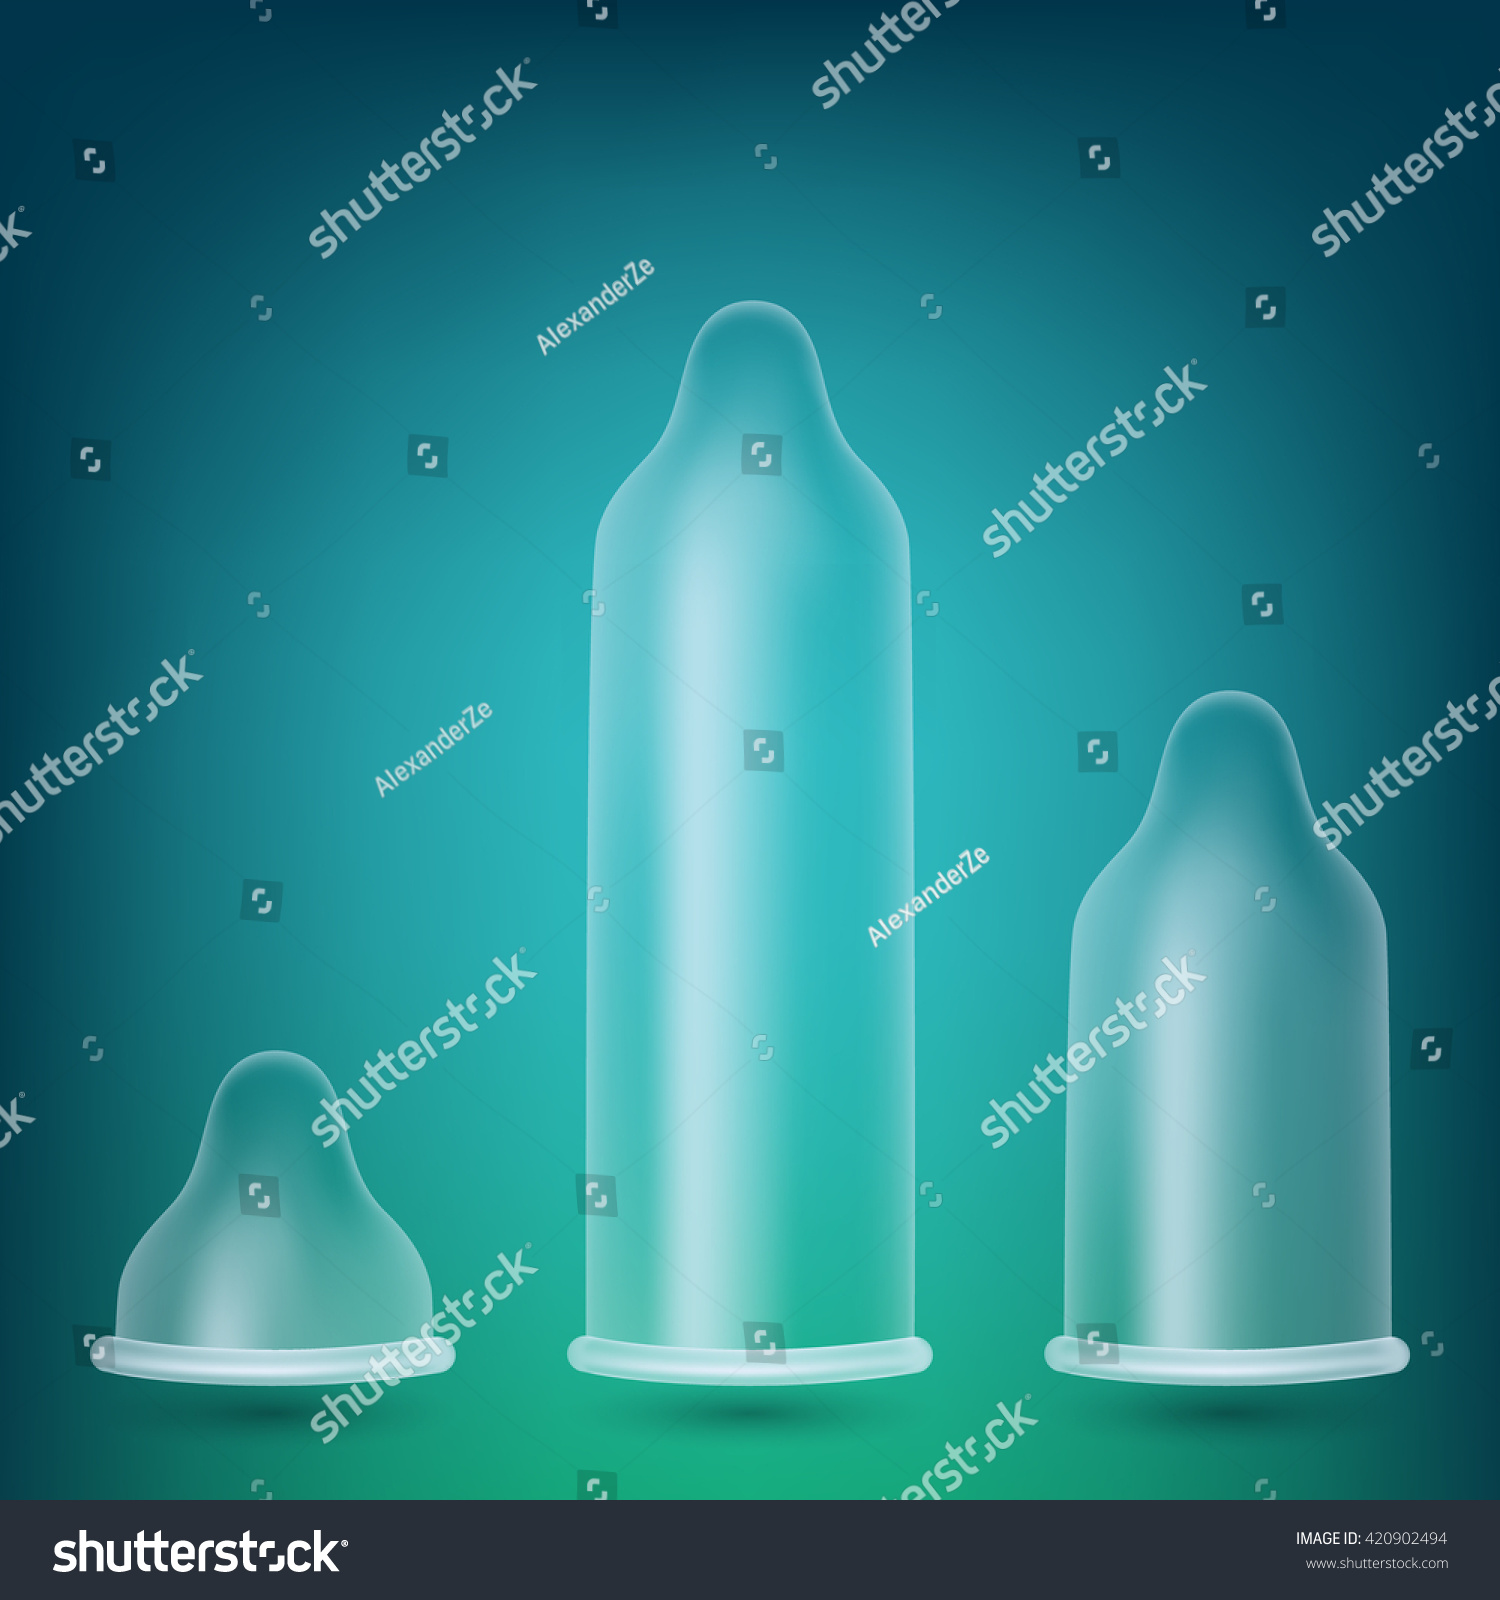 Latex Condoms Realistic Vector Illustration Condoms Without Pack 420902494 Shutterstock